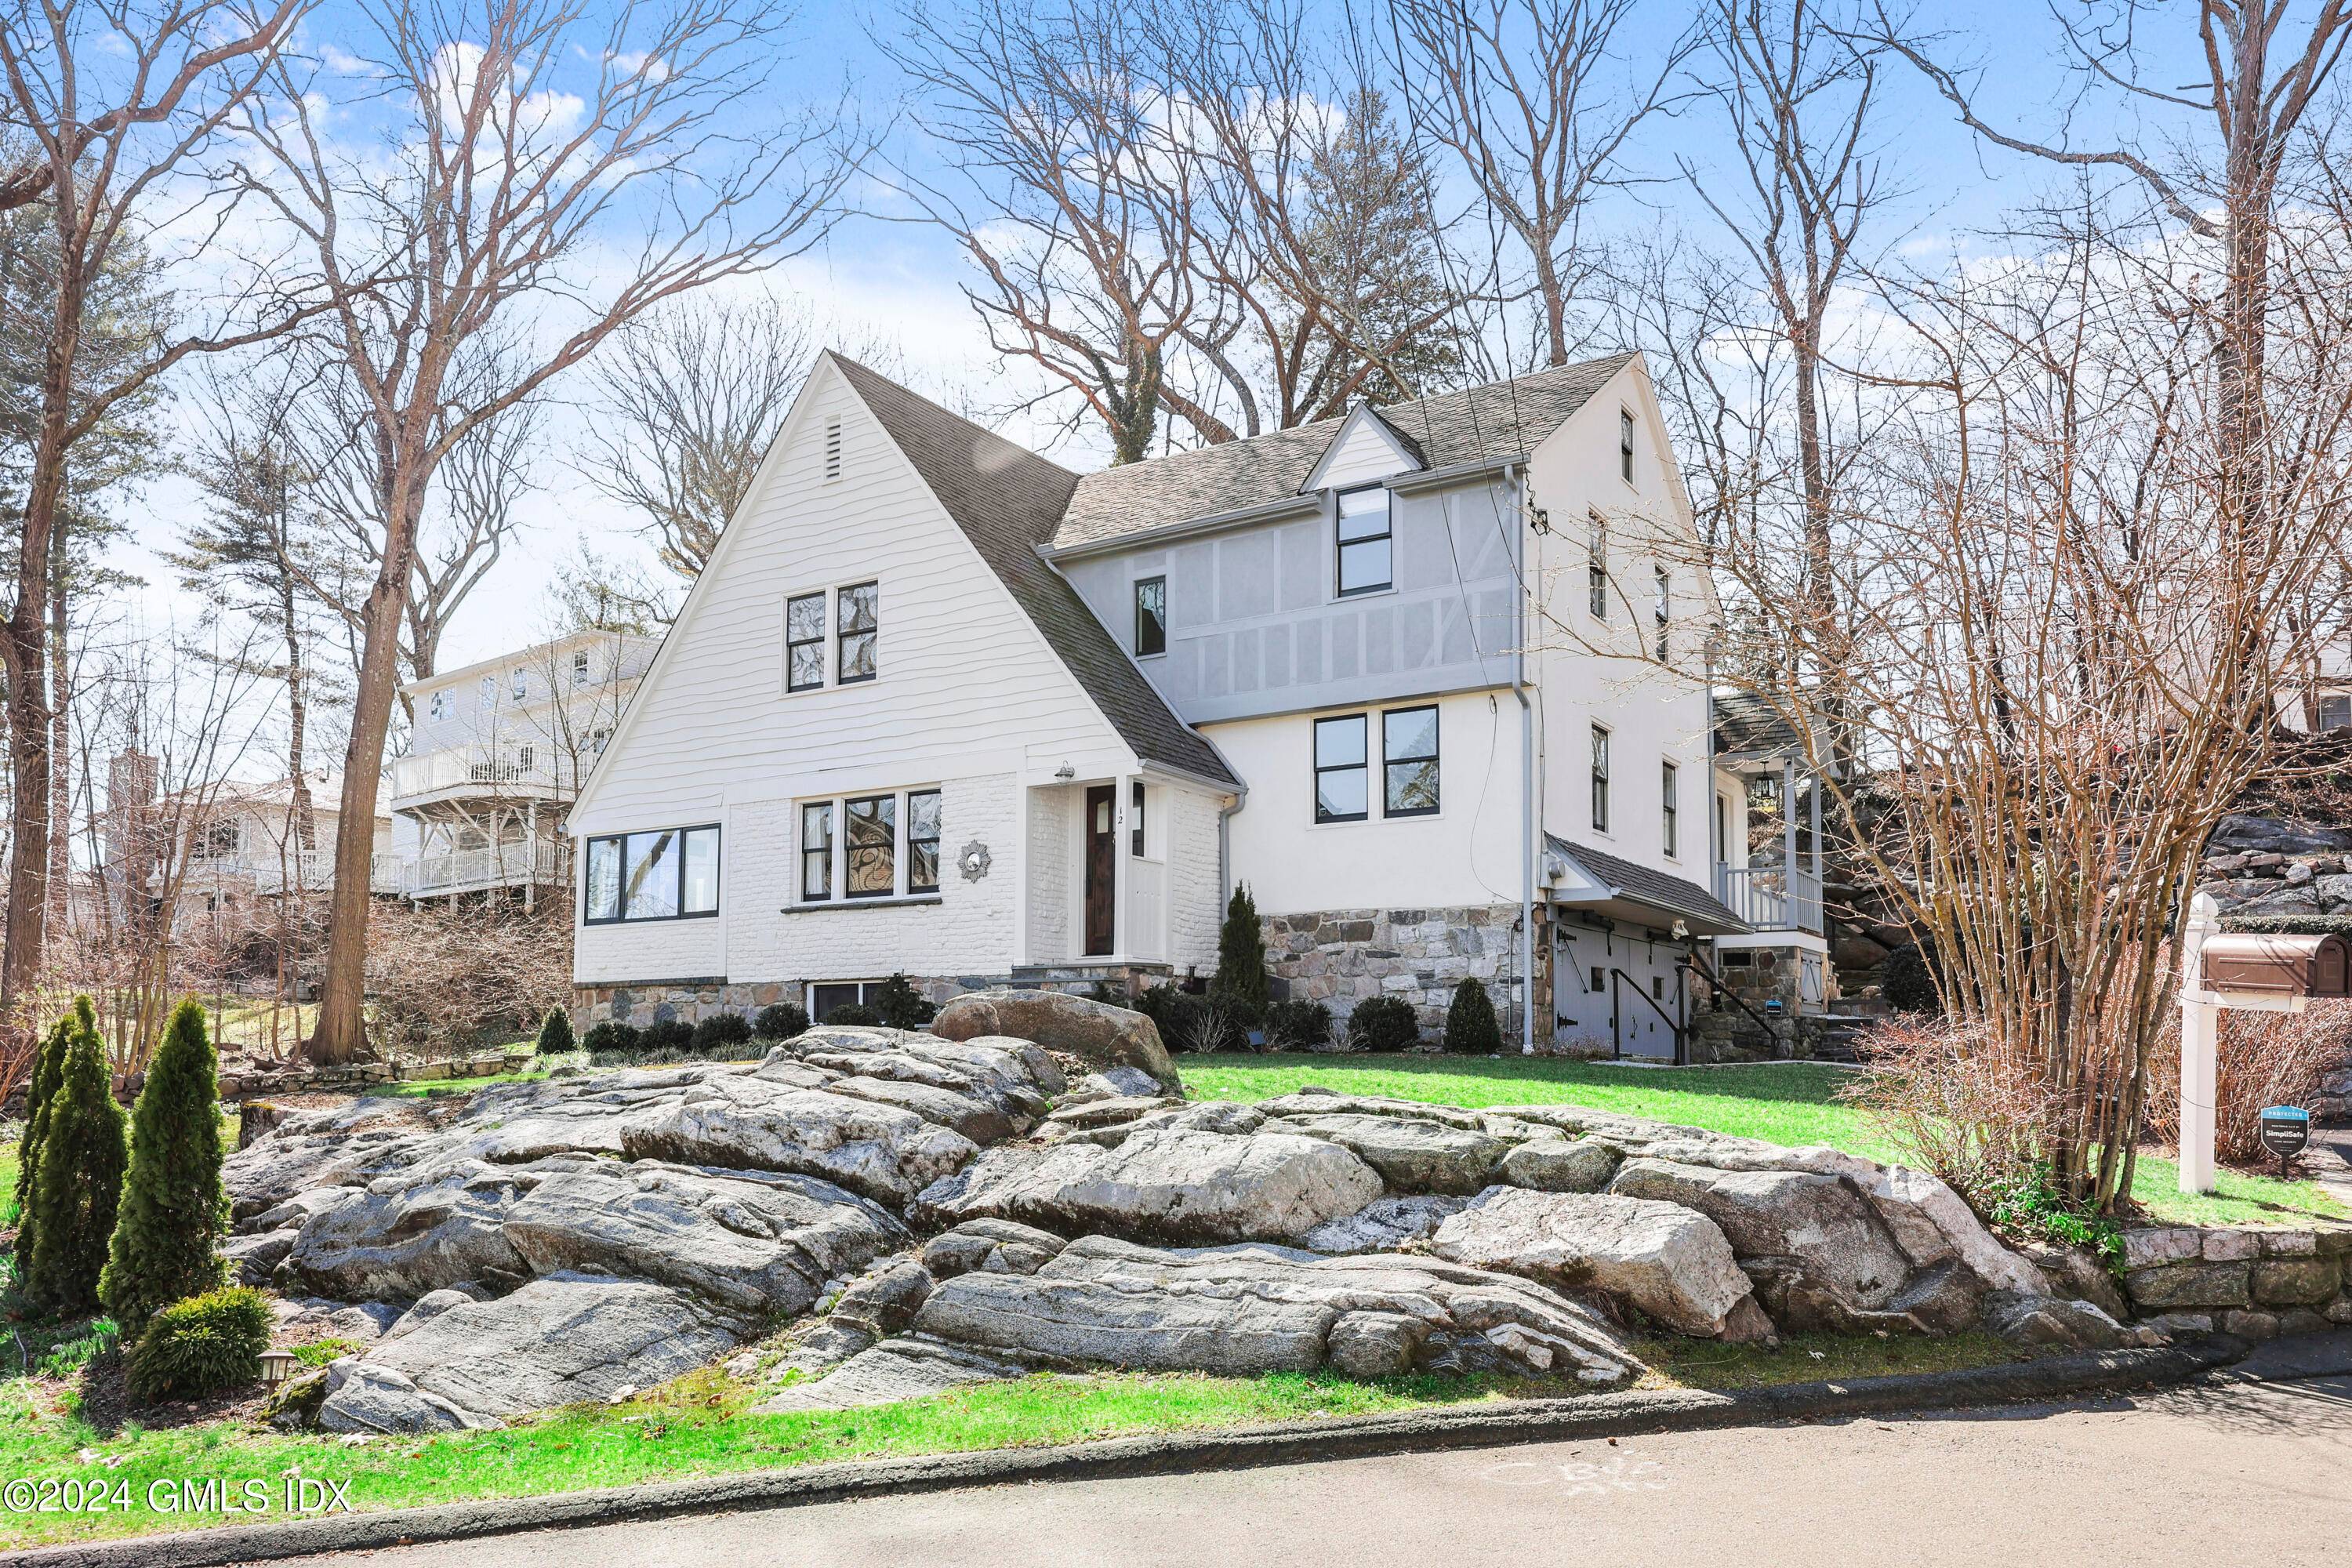 Stylish three bedroom Tudor sits atop an exquisitely landscaped property with entertaining terraces and decks in desirable Cos Cob neighborhood near schools, shops and park.